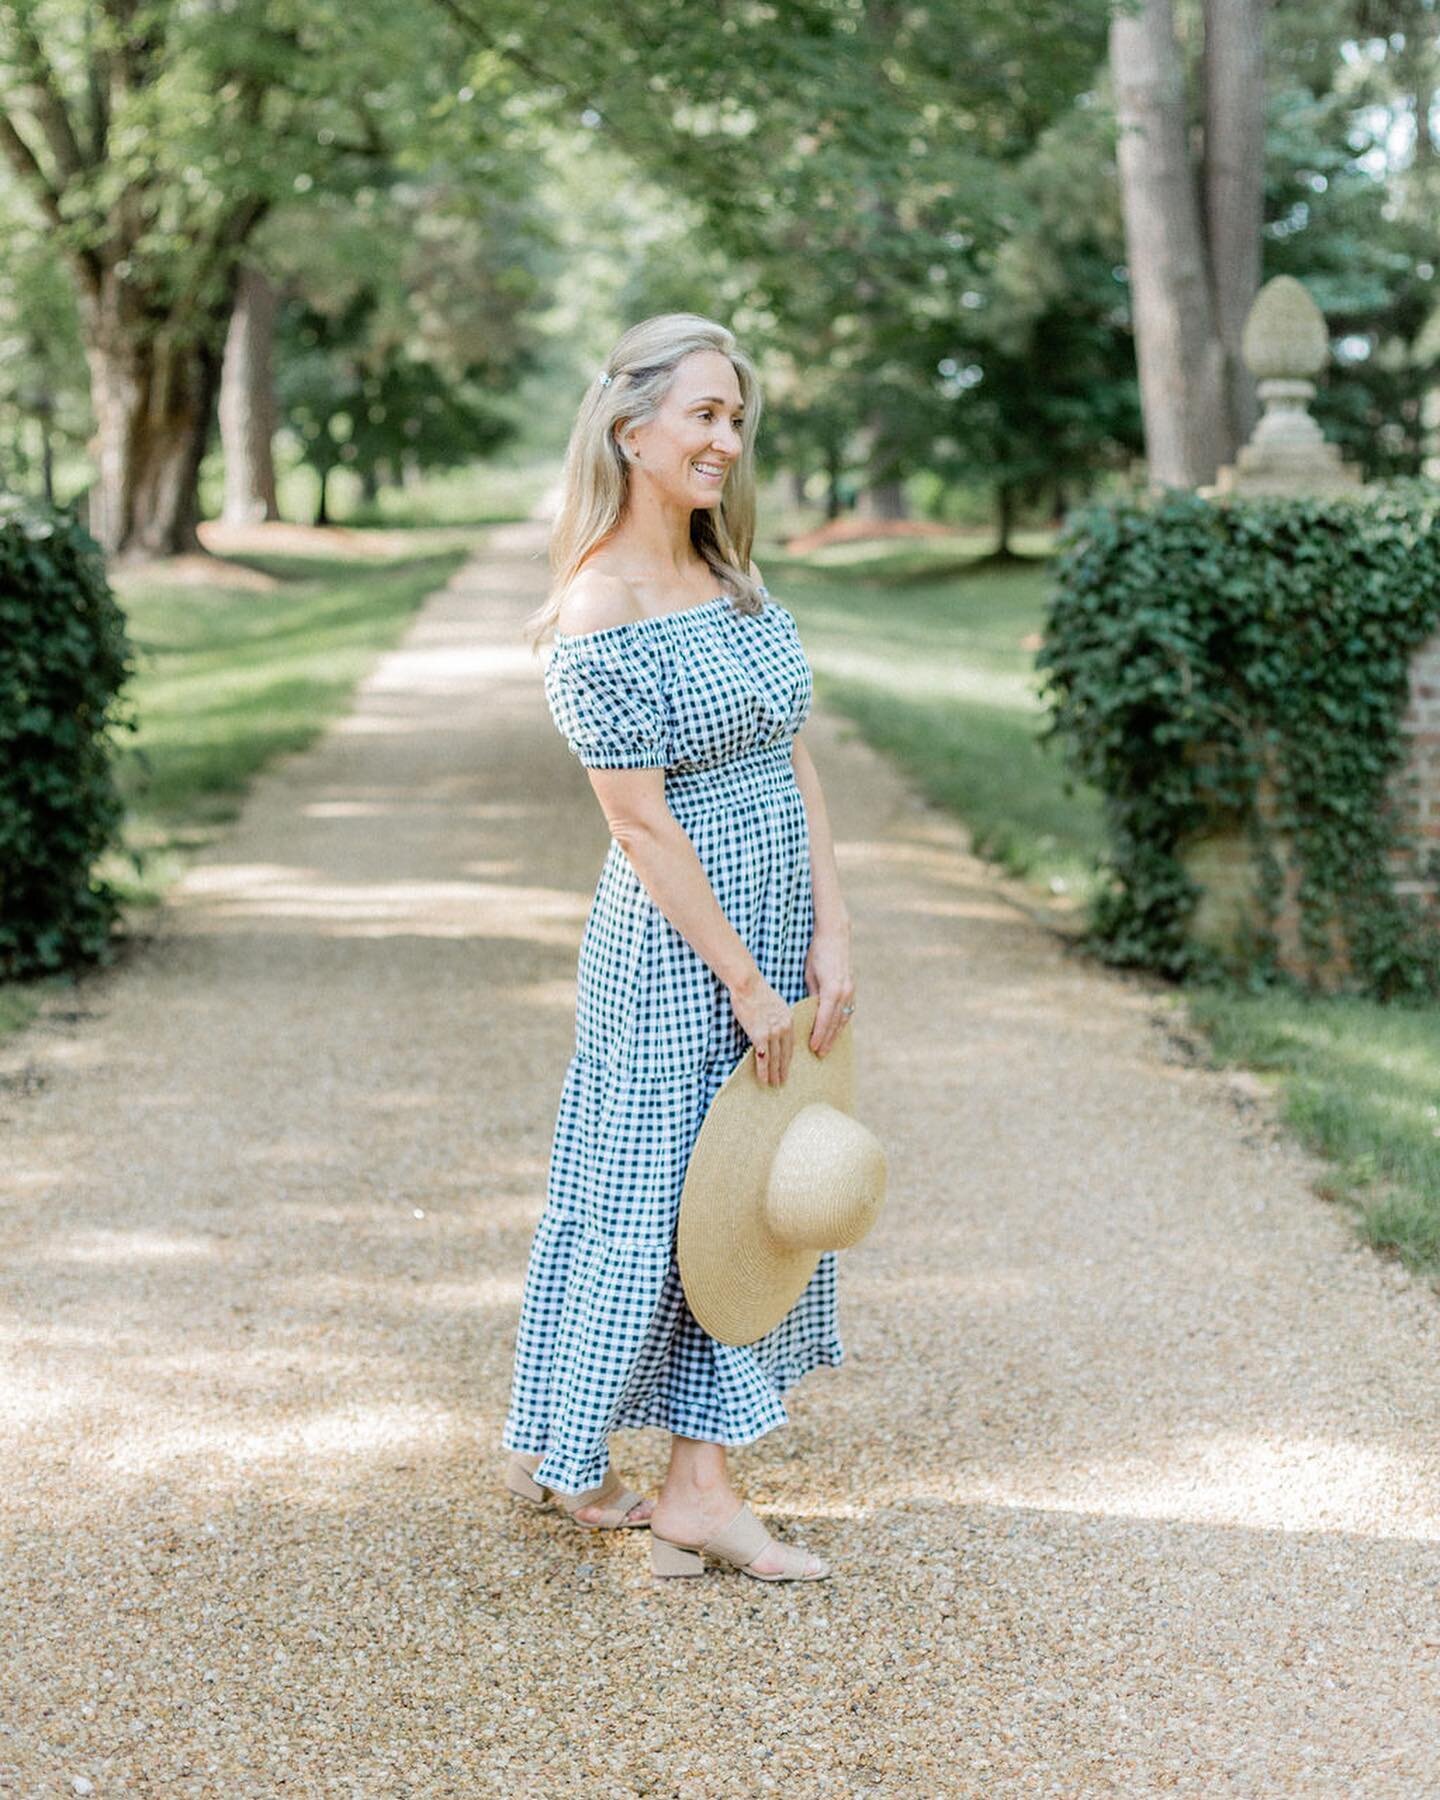 Soaking in these last few gorgeous weeks of summer &amp; getting all the wear out of my favorite dresses! Big thanks to @mirandatatephoto for taking these beautiful photos out on the Eastern Shore. For anyone curious, I&rsquo;ve linked my dress &amp;